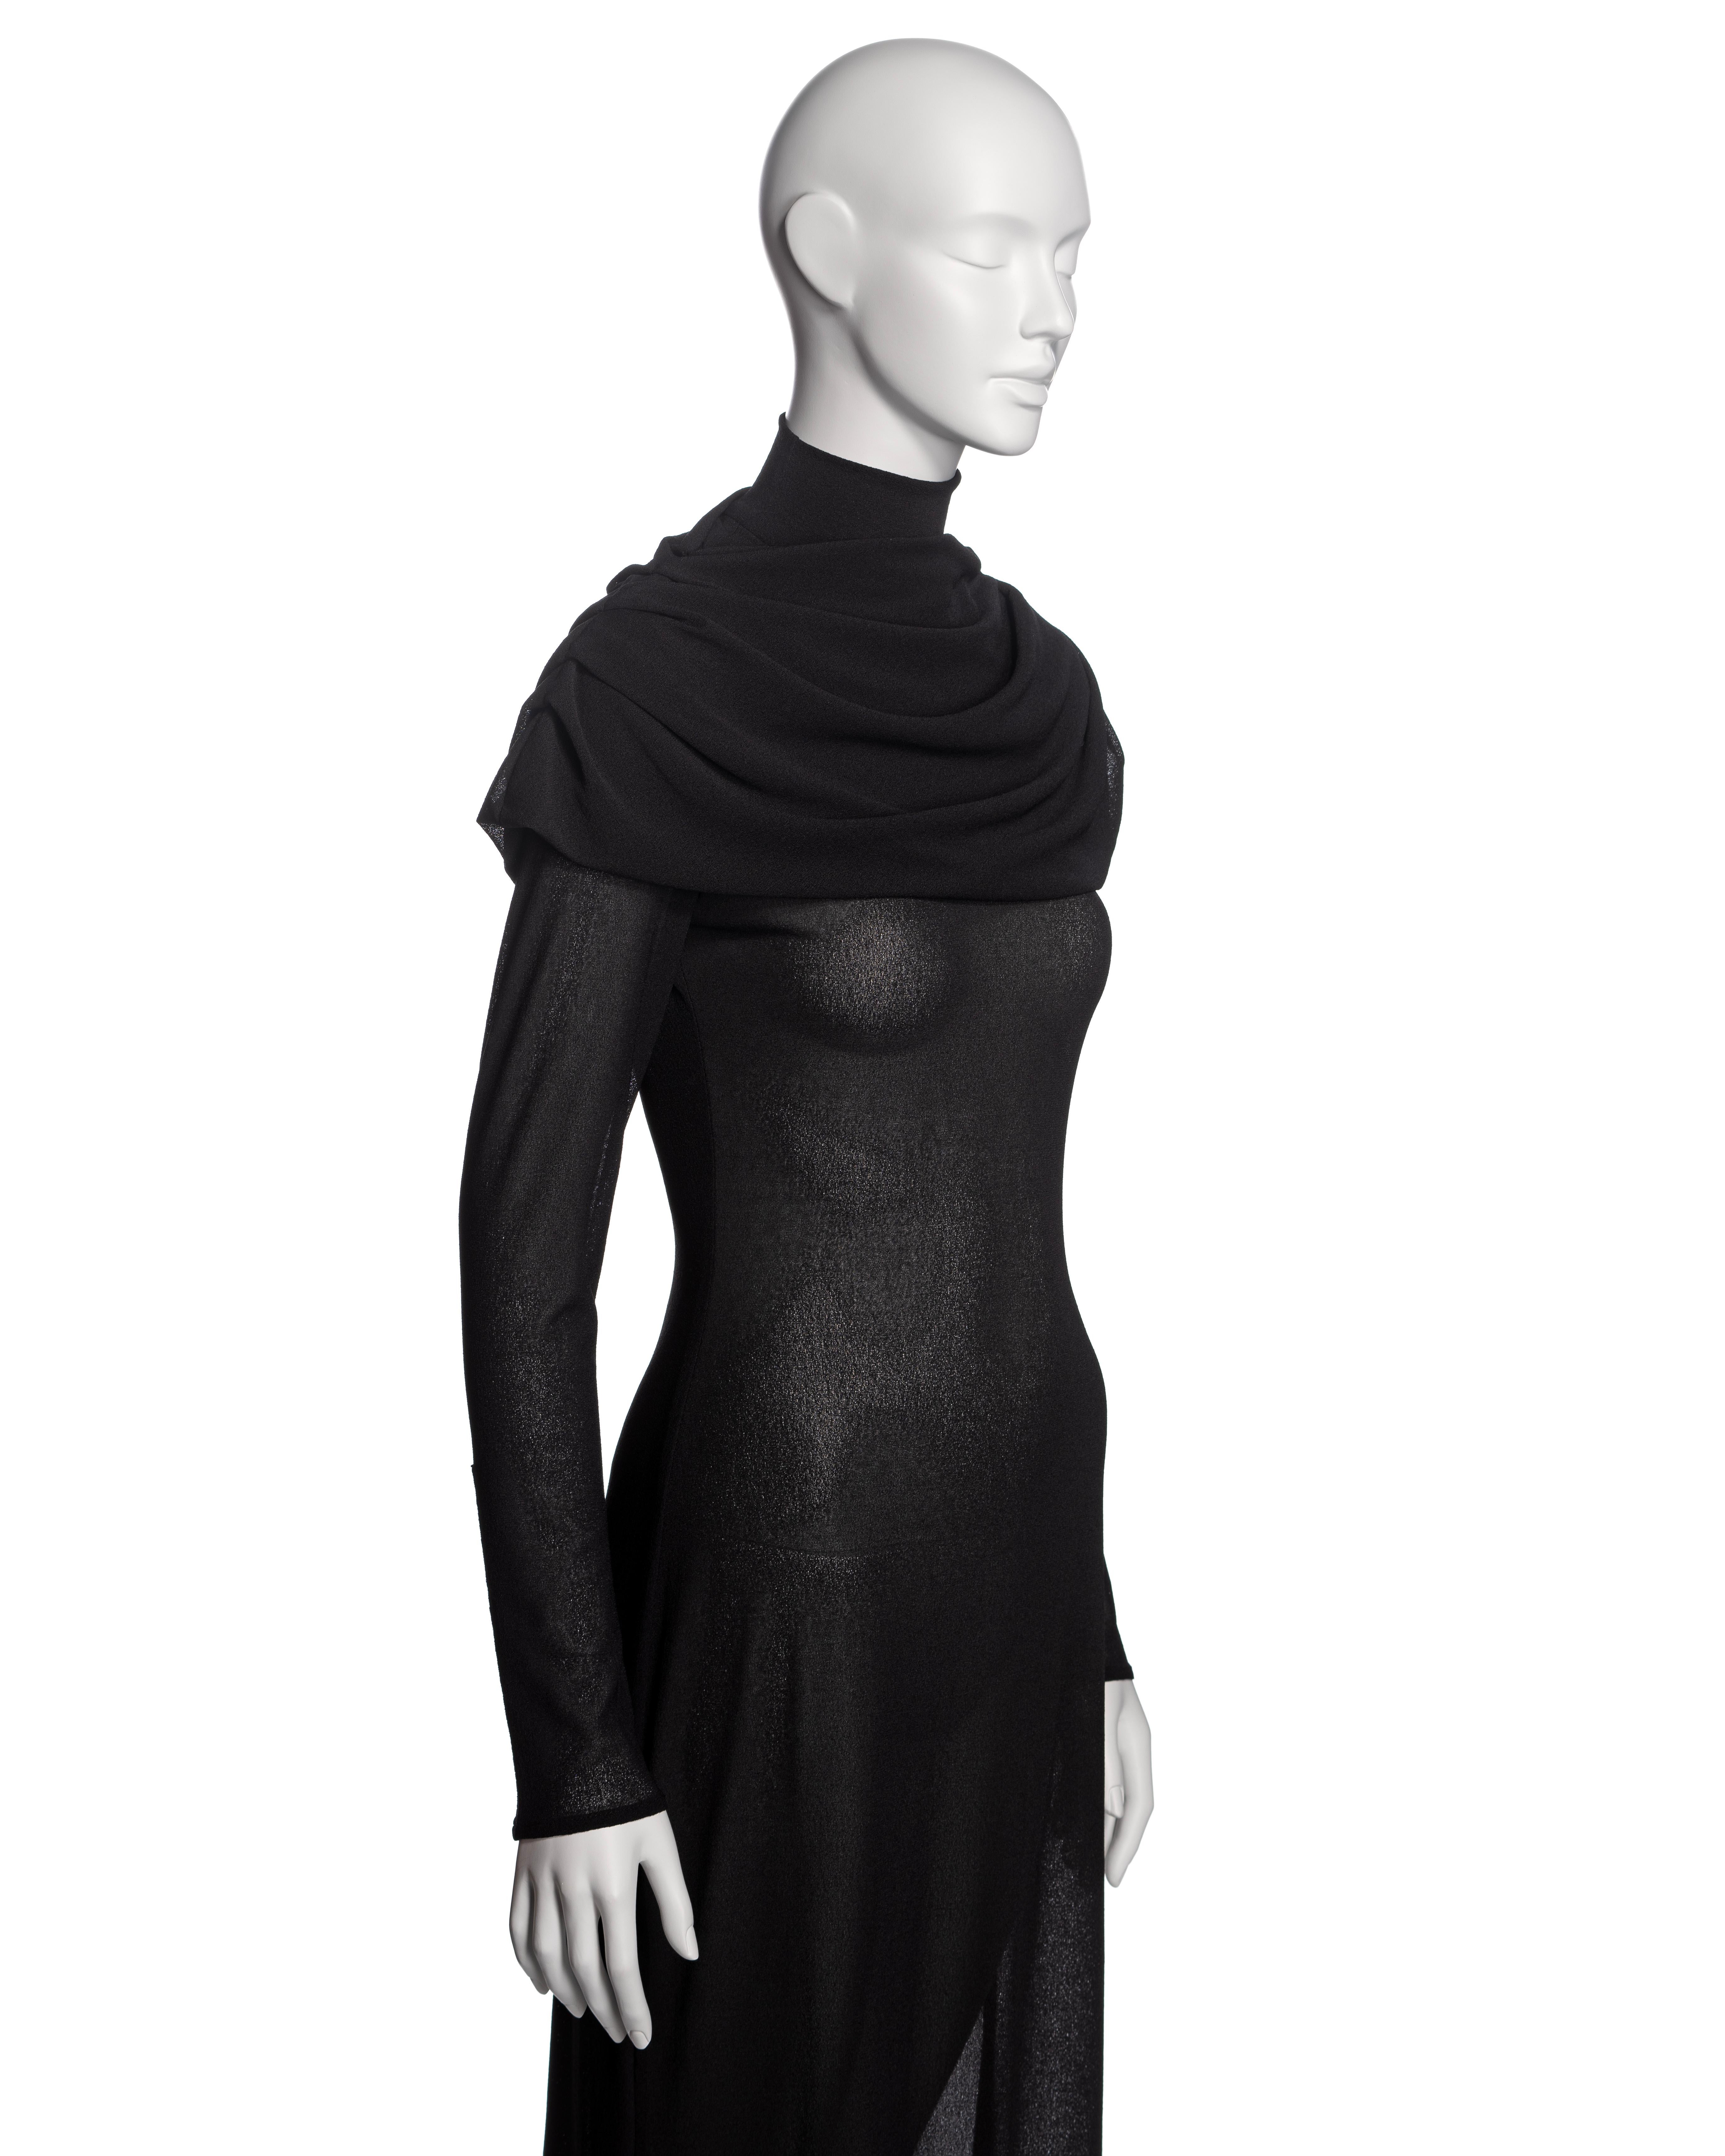 Alexander McQueen Black Mock Neck Evening Dress with Draped Cowl, 'Joan' FW 1998 For Sale 2